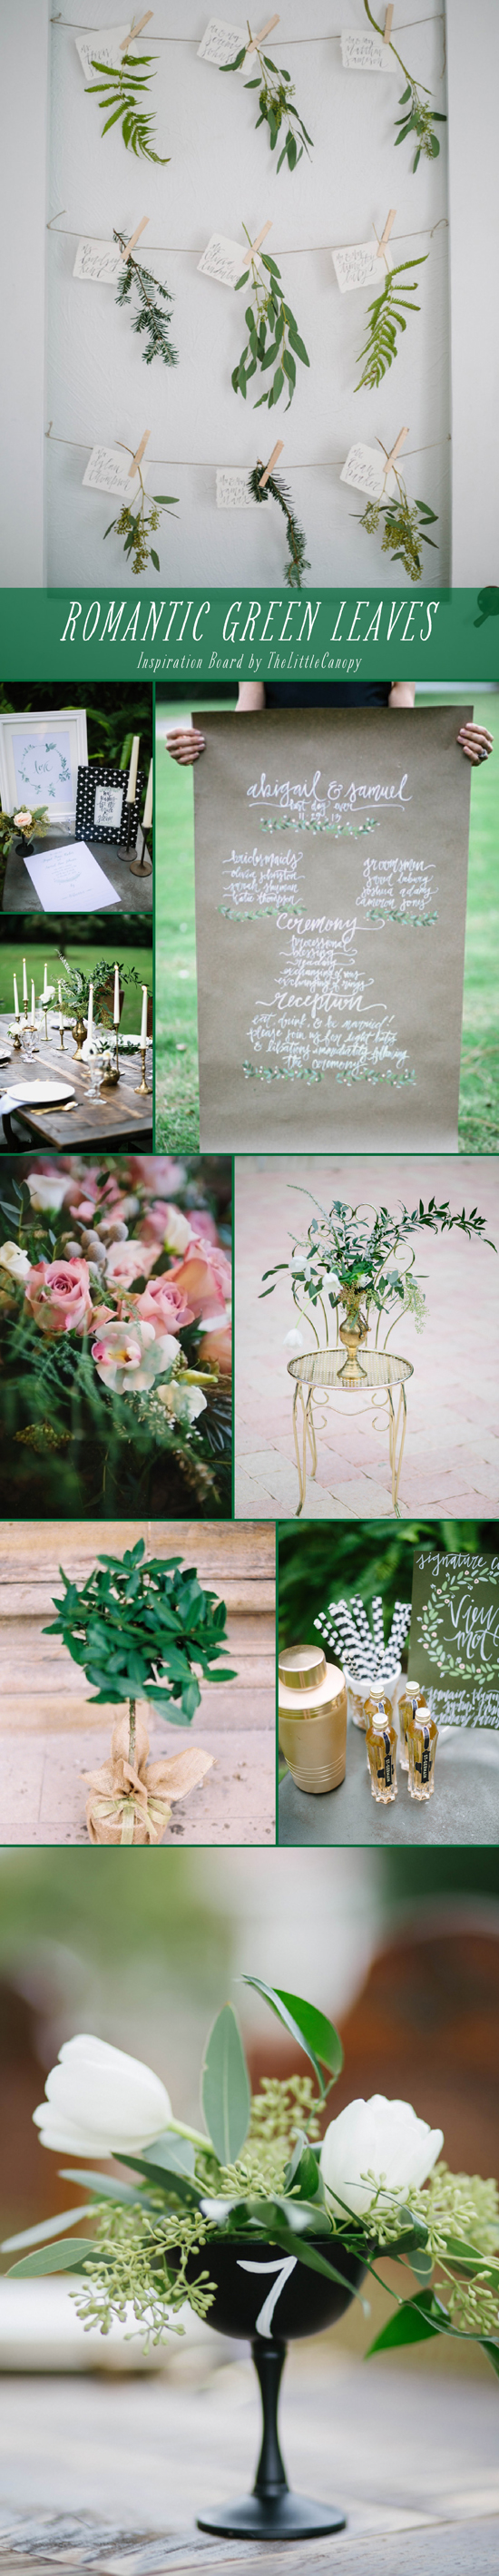 wedding, inspiration, board, mood, romantic, green, leaves, garlands, branches